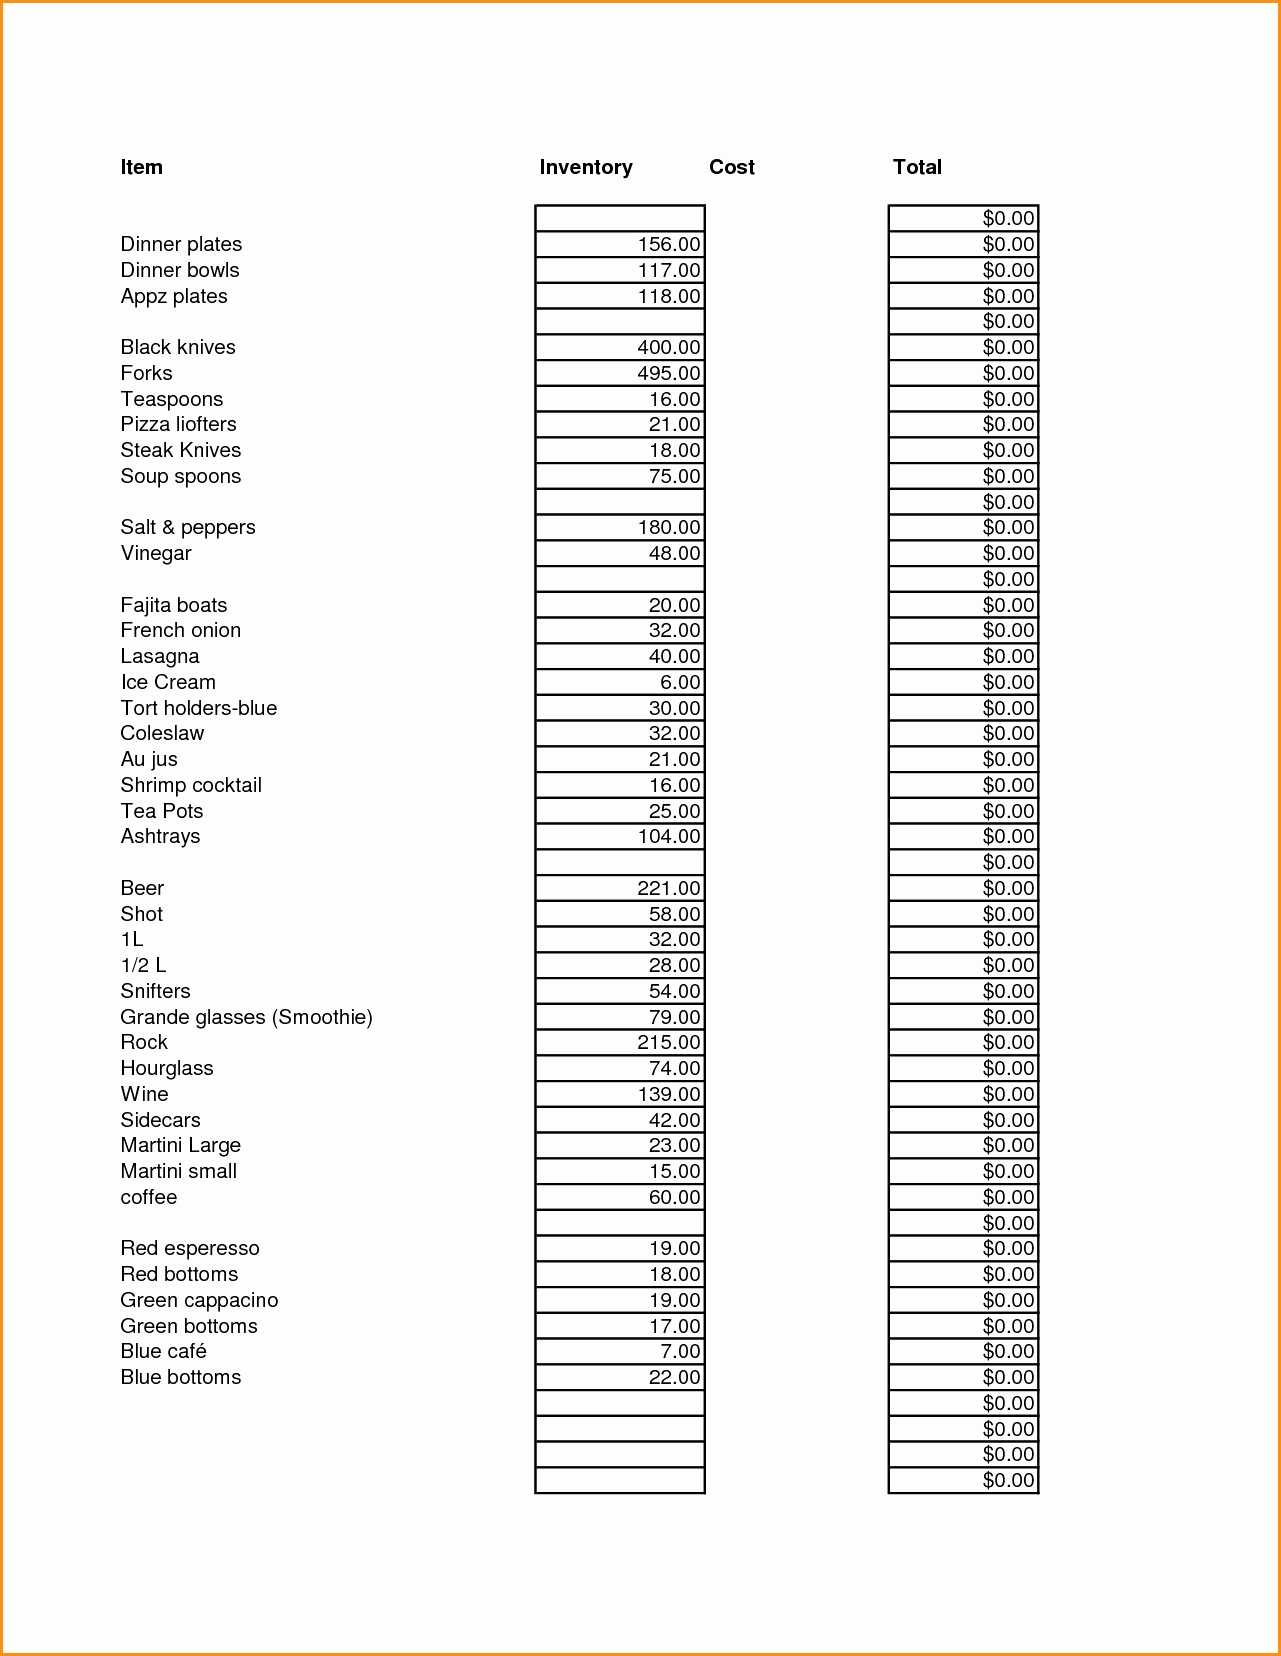 Home Inventory Worksheet together with How to Make An Inventory Spreadsheet New Debt Consolidation